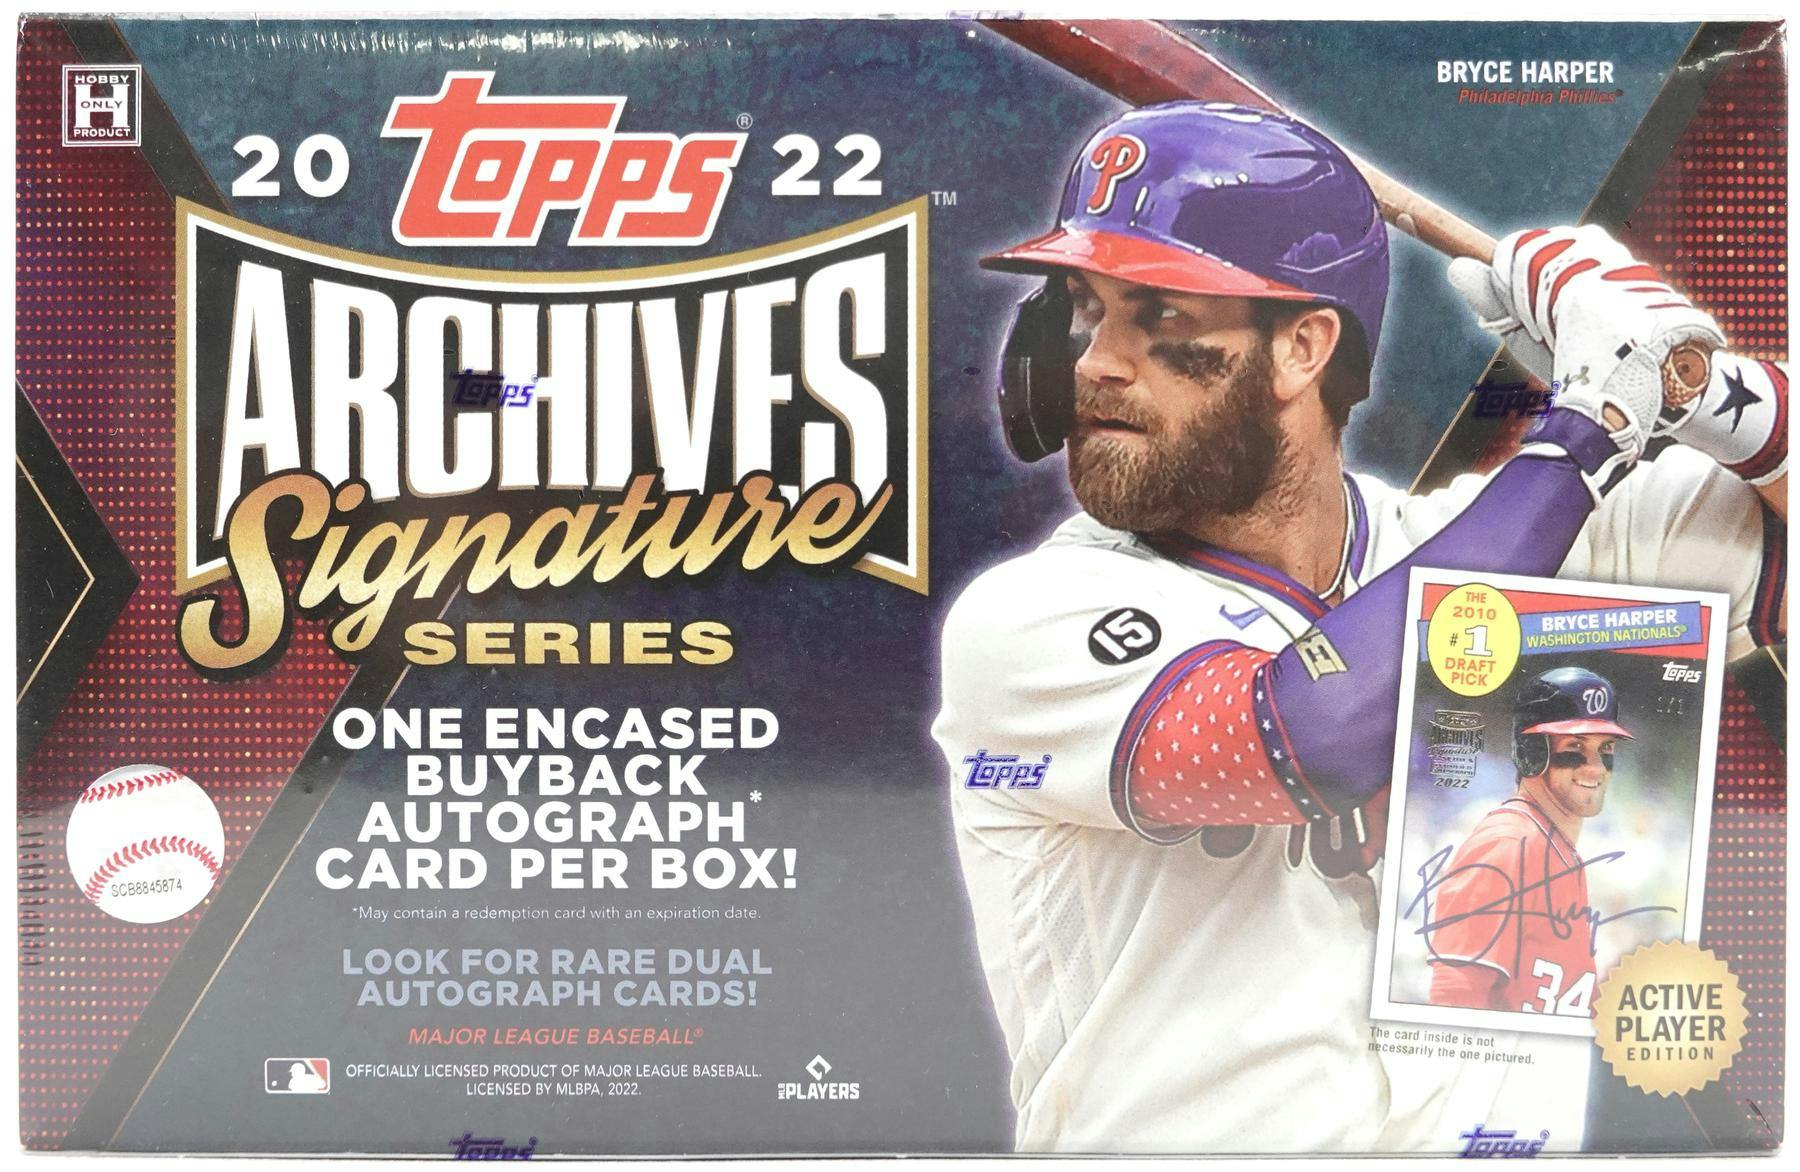 2022 Topps Archives Signature Series Retired Checklist Info, Boxes